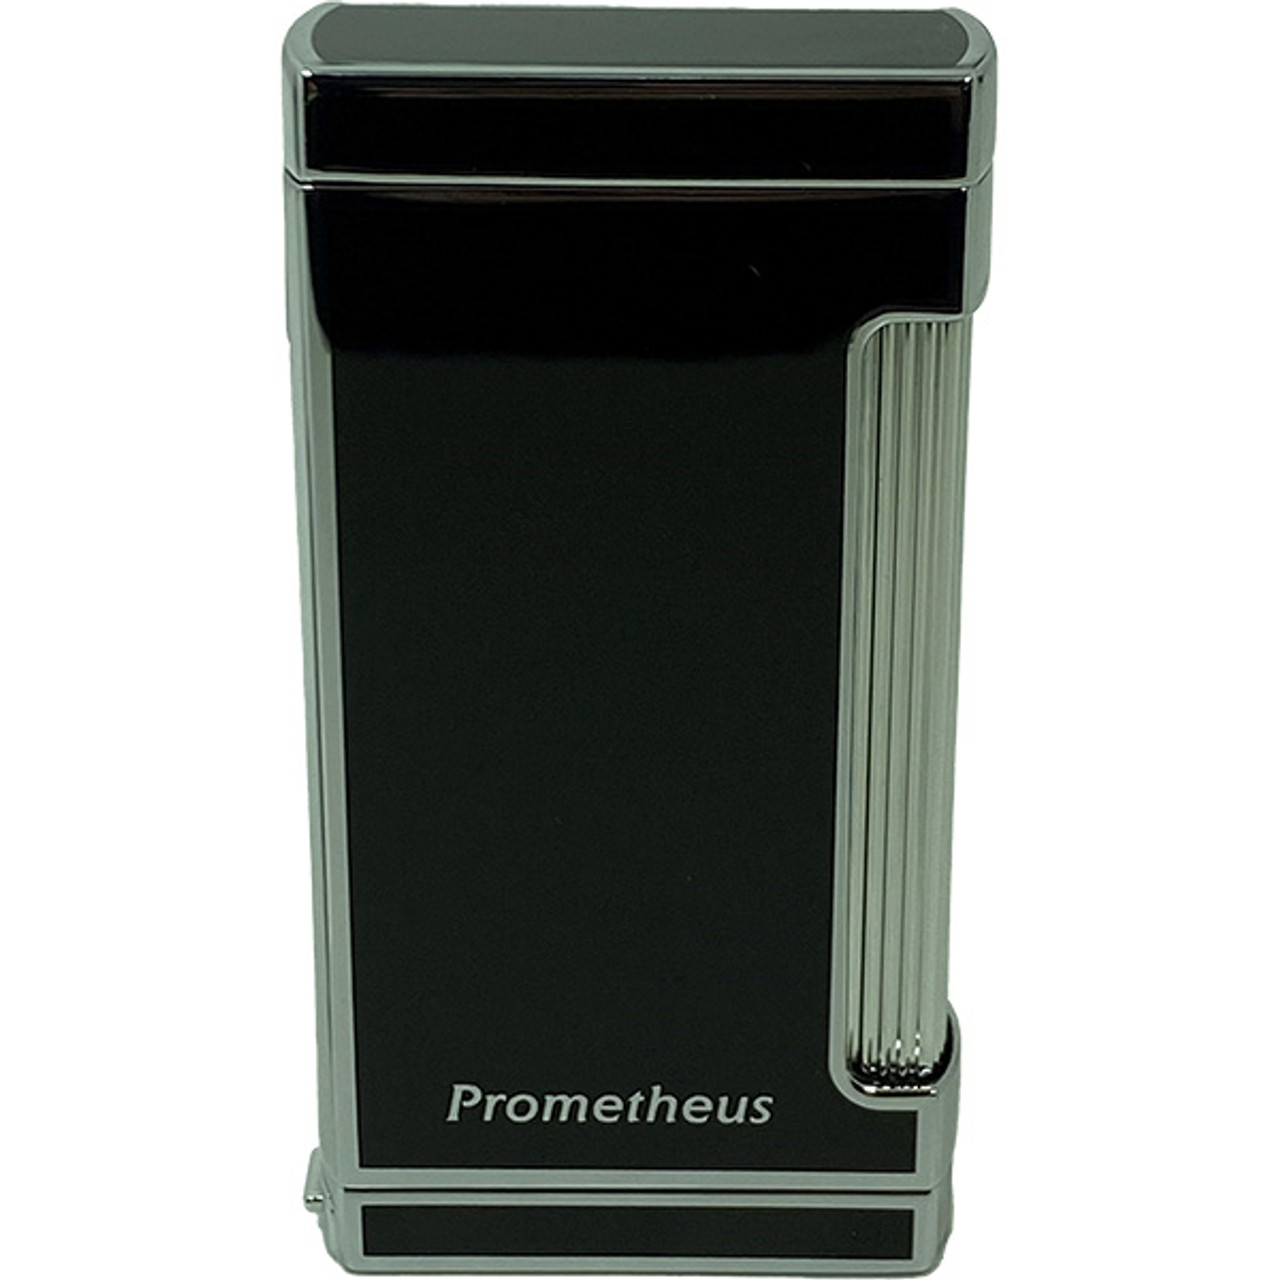 Prometheus Black Lacquer with Chrome Metal Cigar Tube - Best Cigar Prices